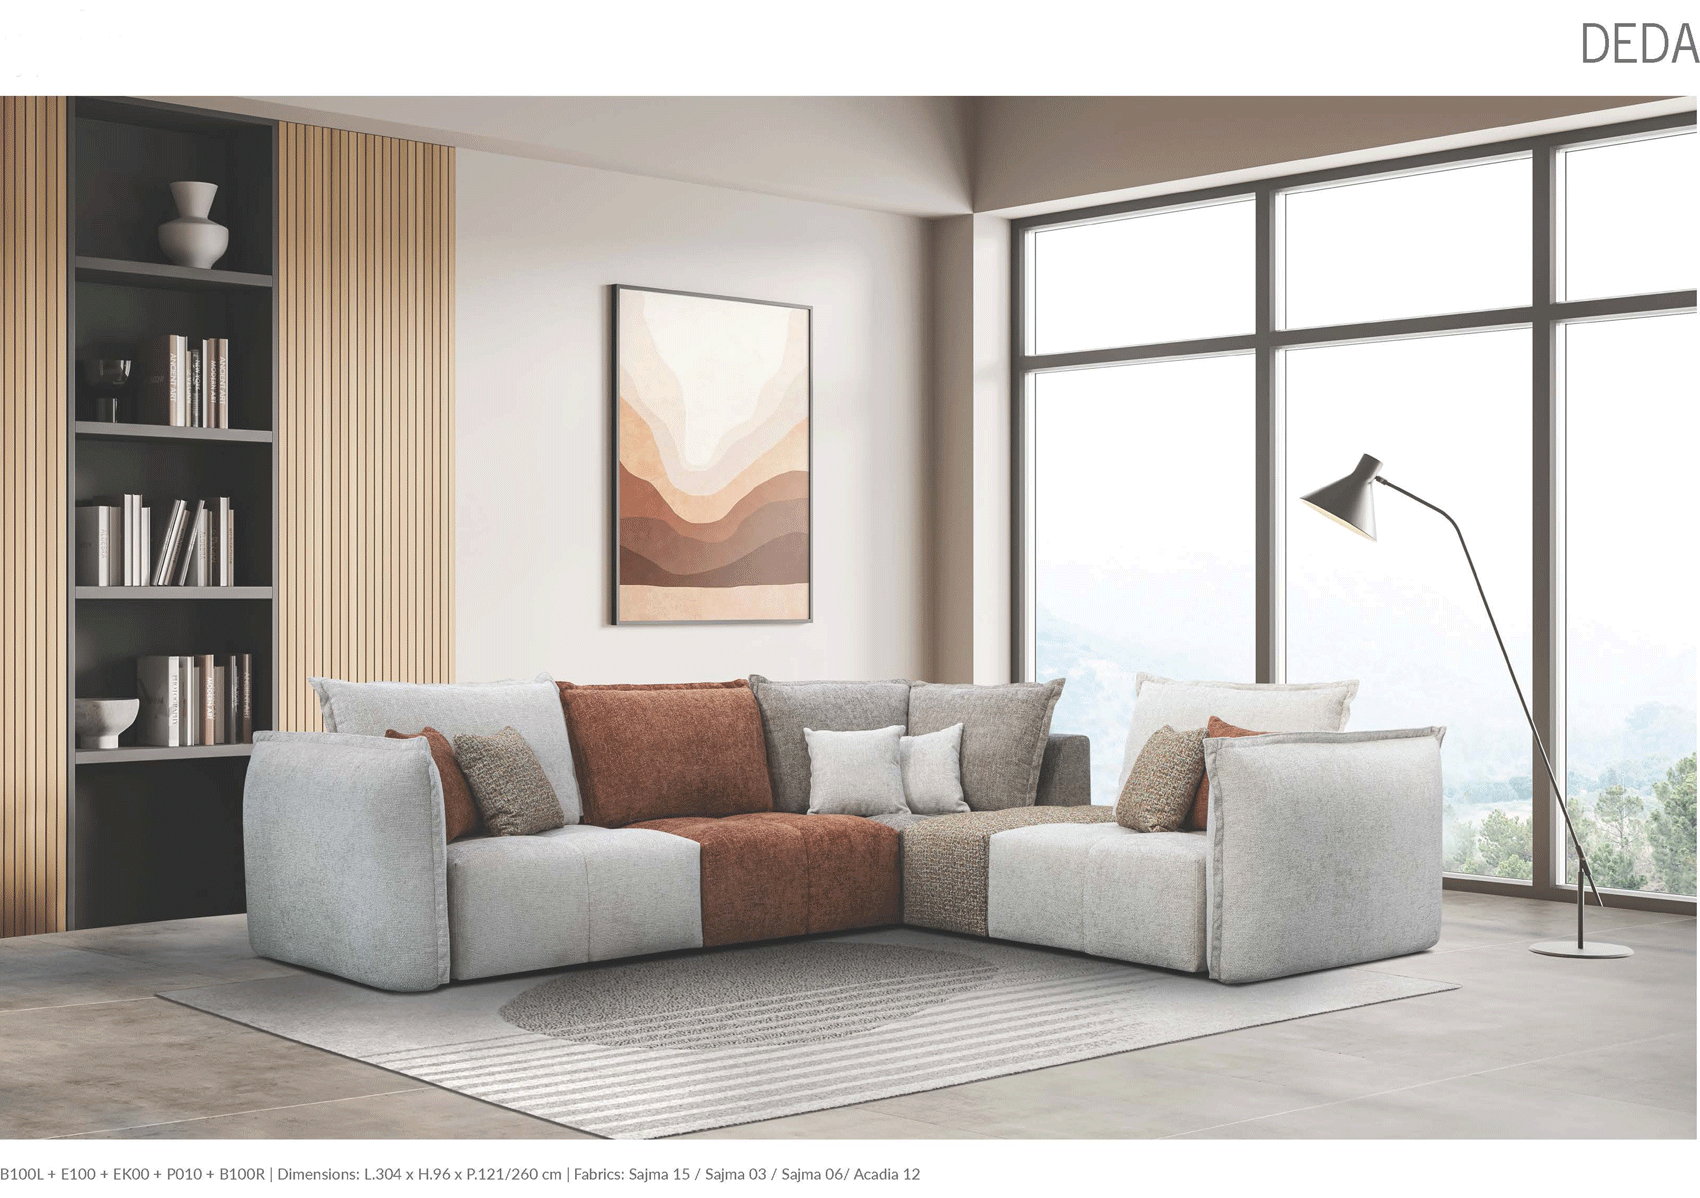 Living Room Furniture Sleepers Sofas Loveseats and Chairs Deda Sectional